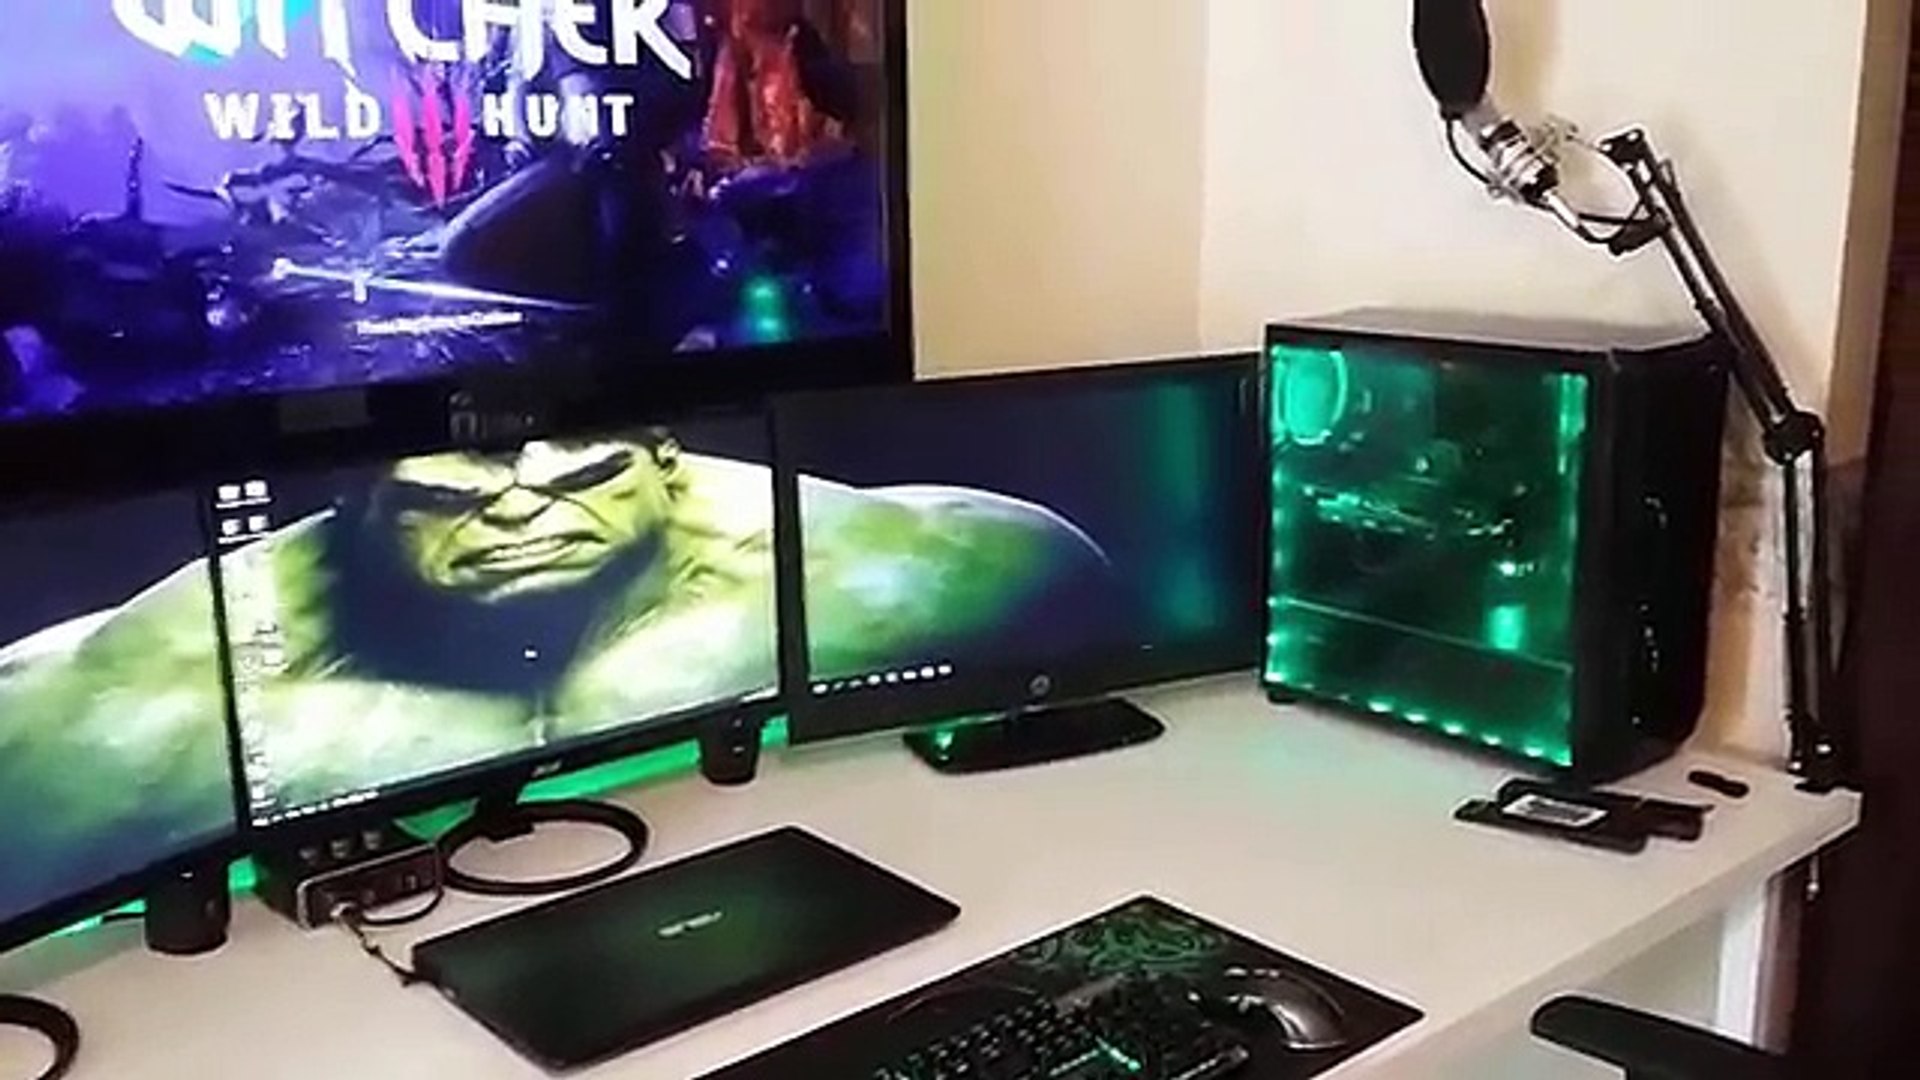 Running my triple monitor Gaming Setup off of solar power - video  Dailymotion